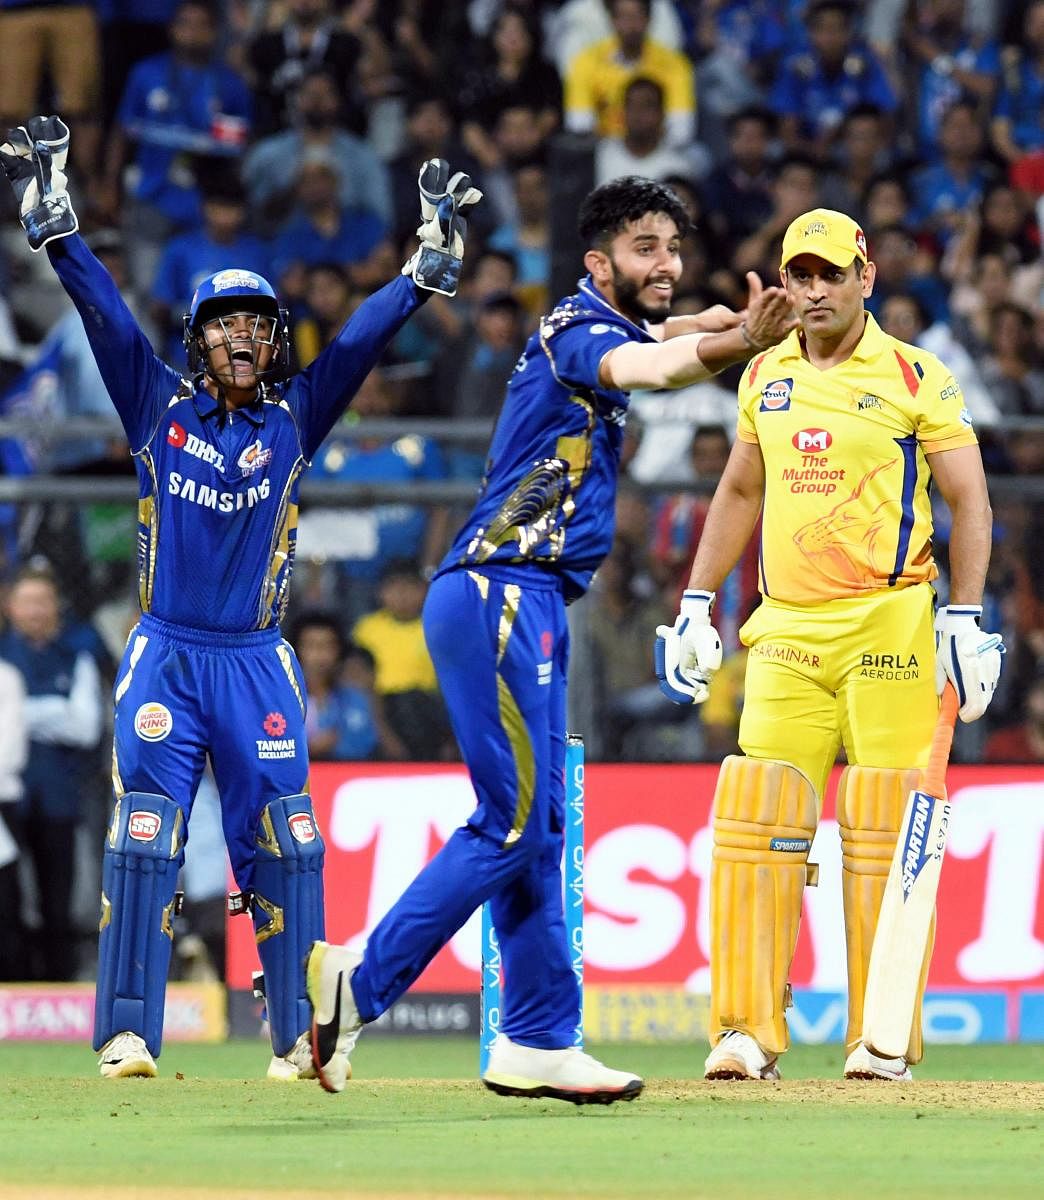 BRIGHT START Mumbai Indians' bowler Mayank Markande appeals successfully for an LBW verdict against Chennai Super Kings' skipper MS Dhoni on Saturday. PTI